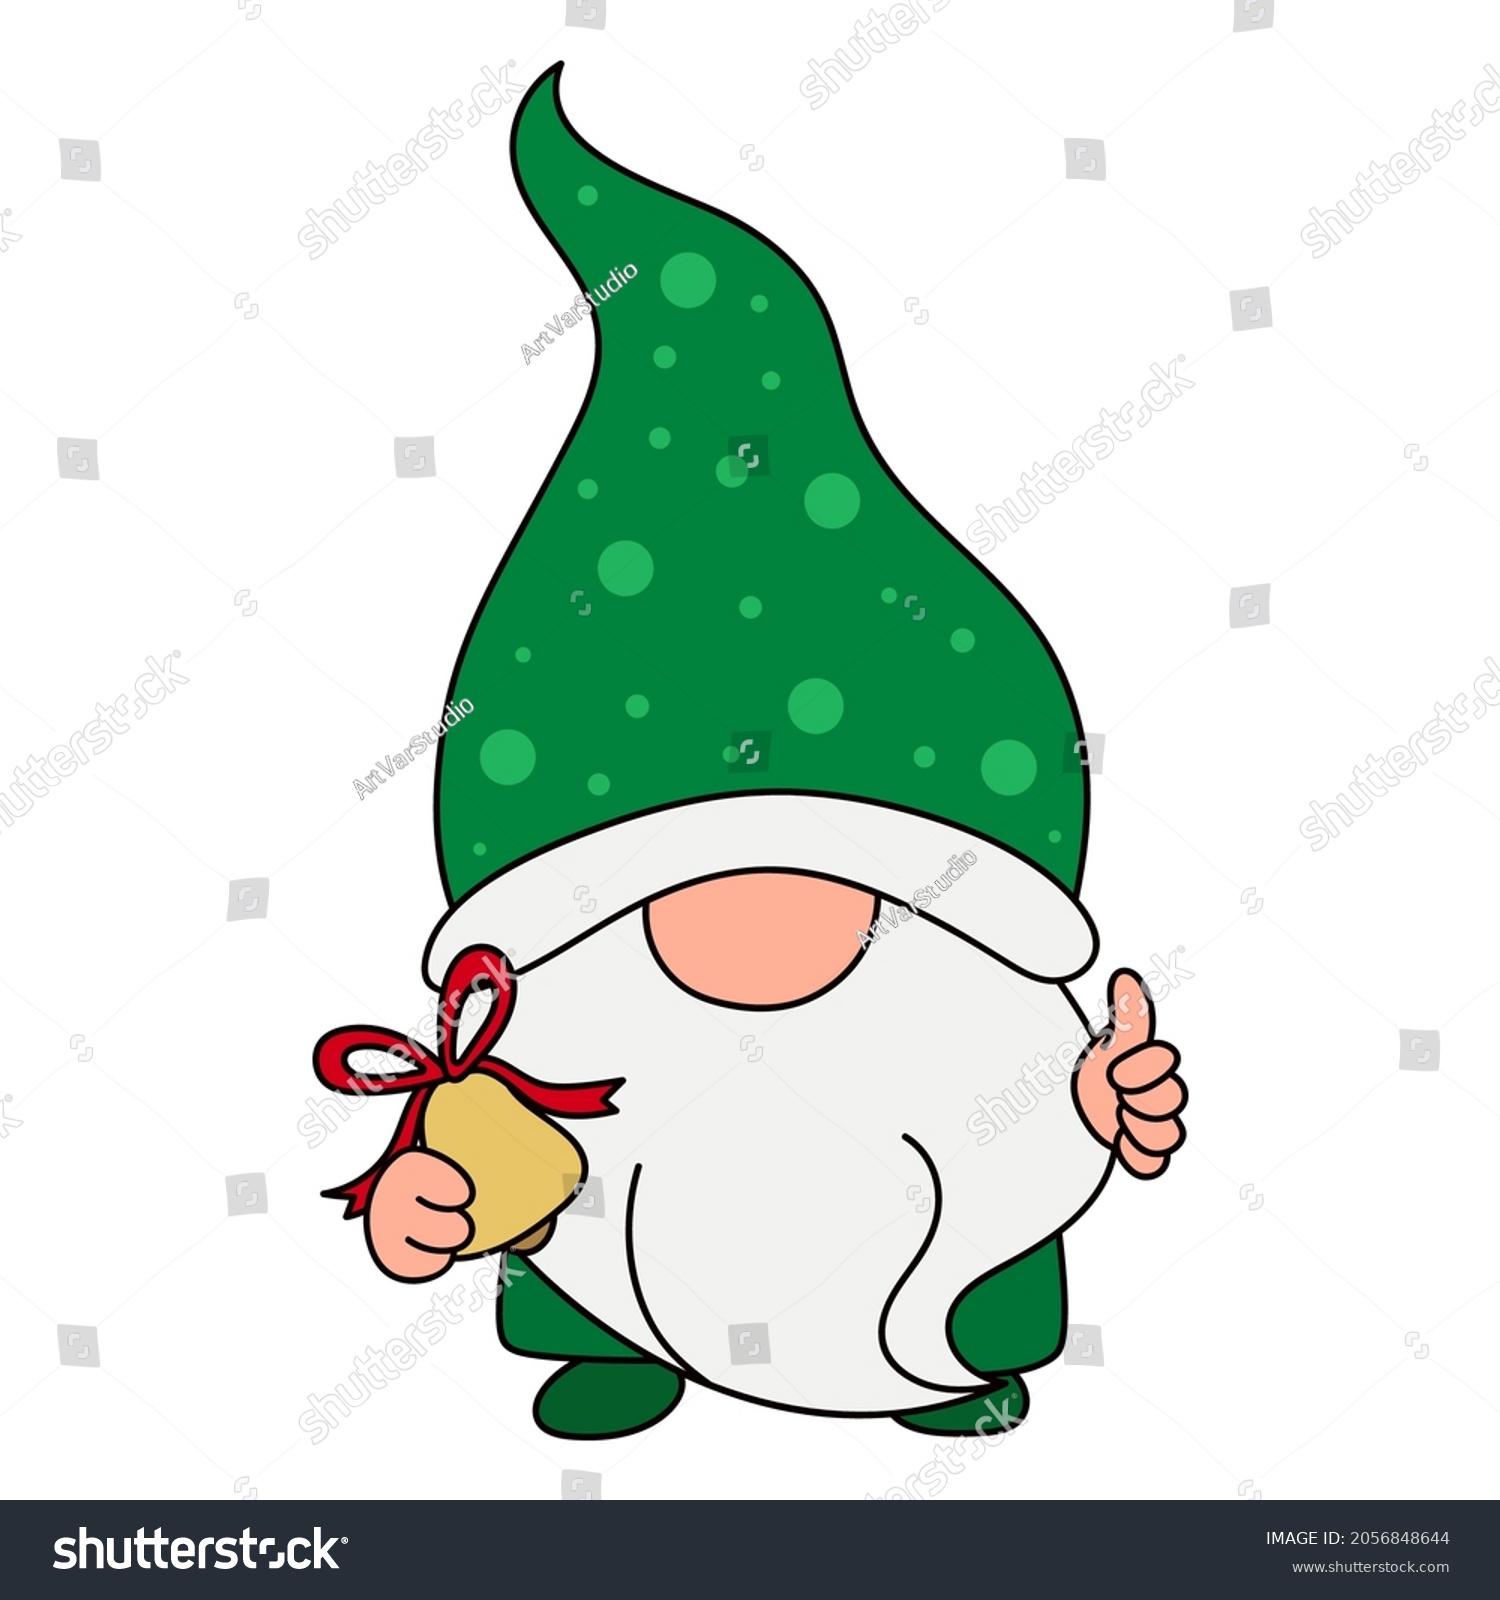 SVG of Christmas gnome illustration. Vector illustration of gnome for nursery room decor, posters, greeting cards and party invitations. Xmas gnome clipart for kids print. svg